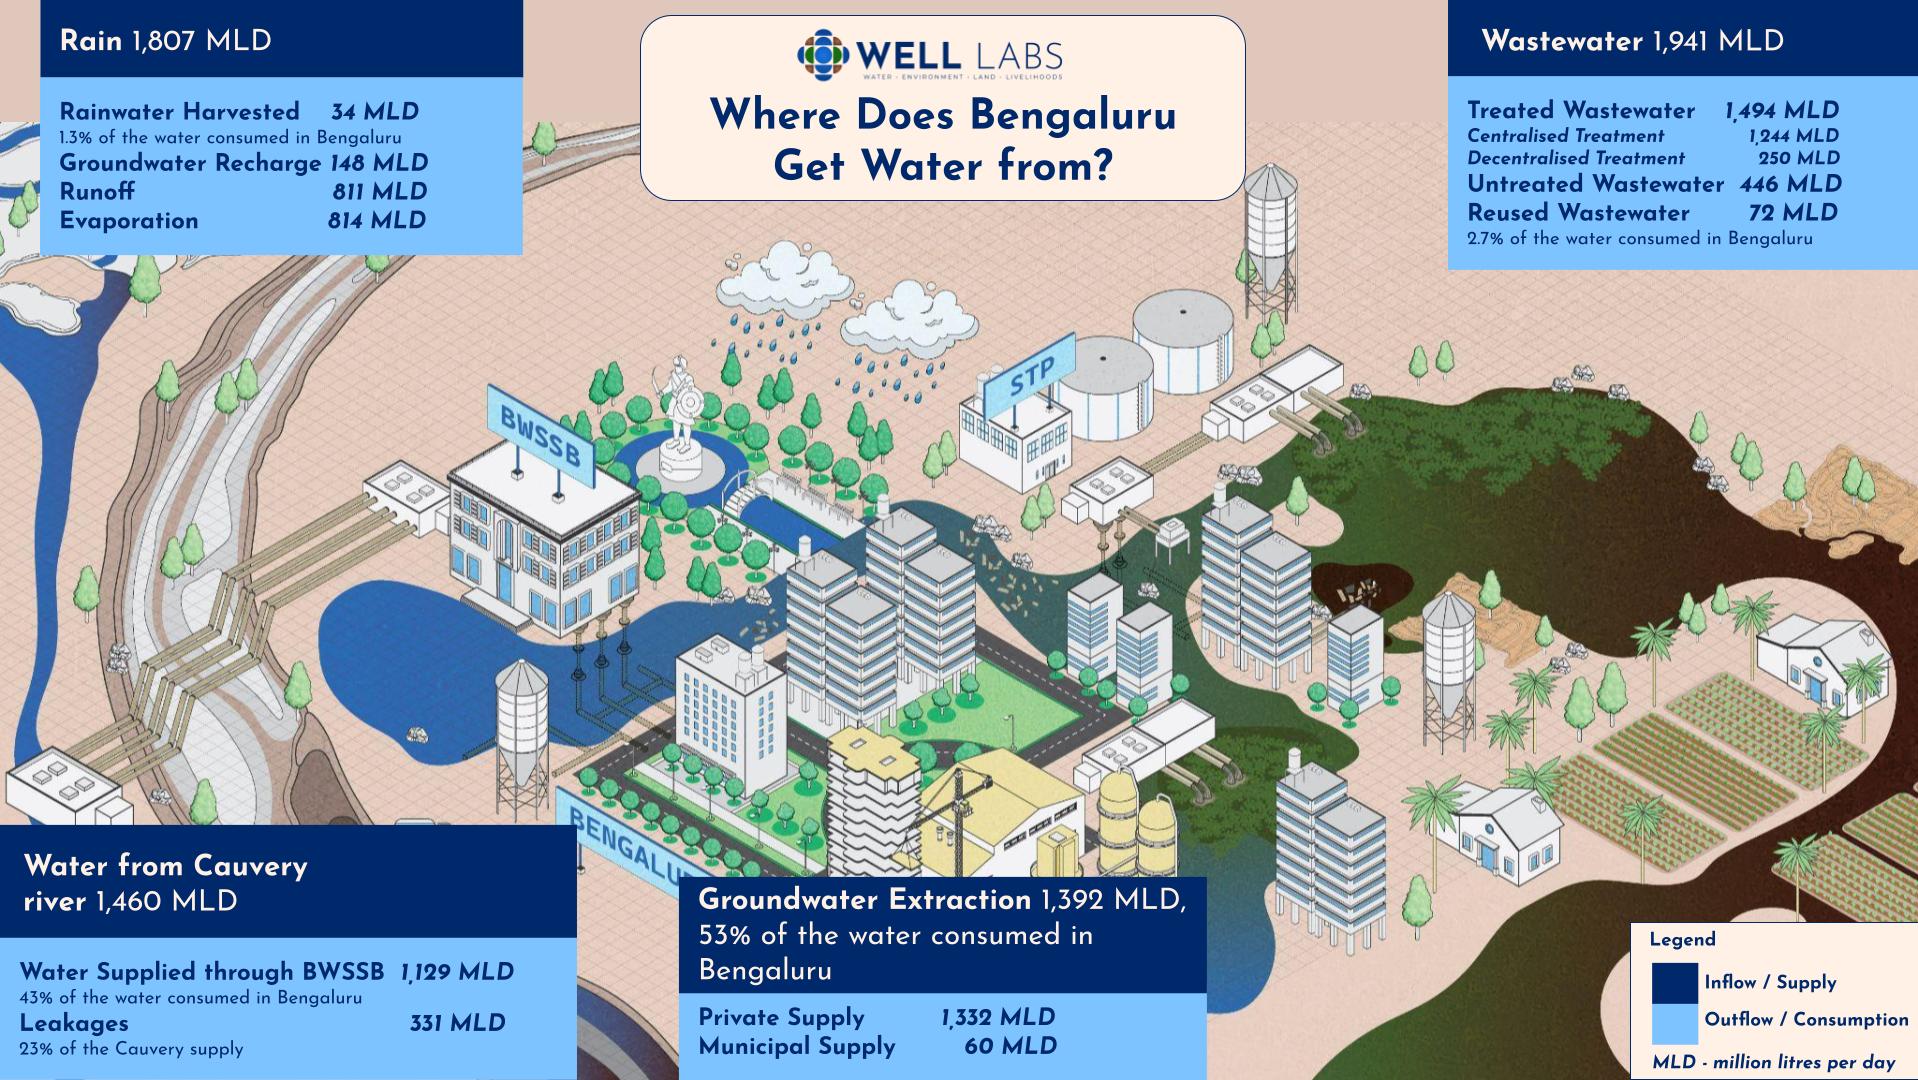 An illustration showing Bengaluru's major water sources: groundwater and the Cauvery river